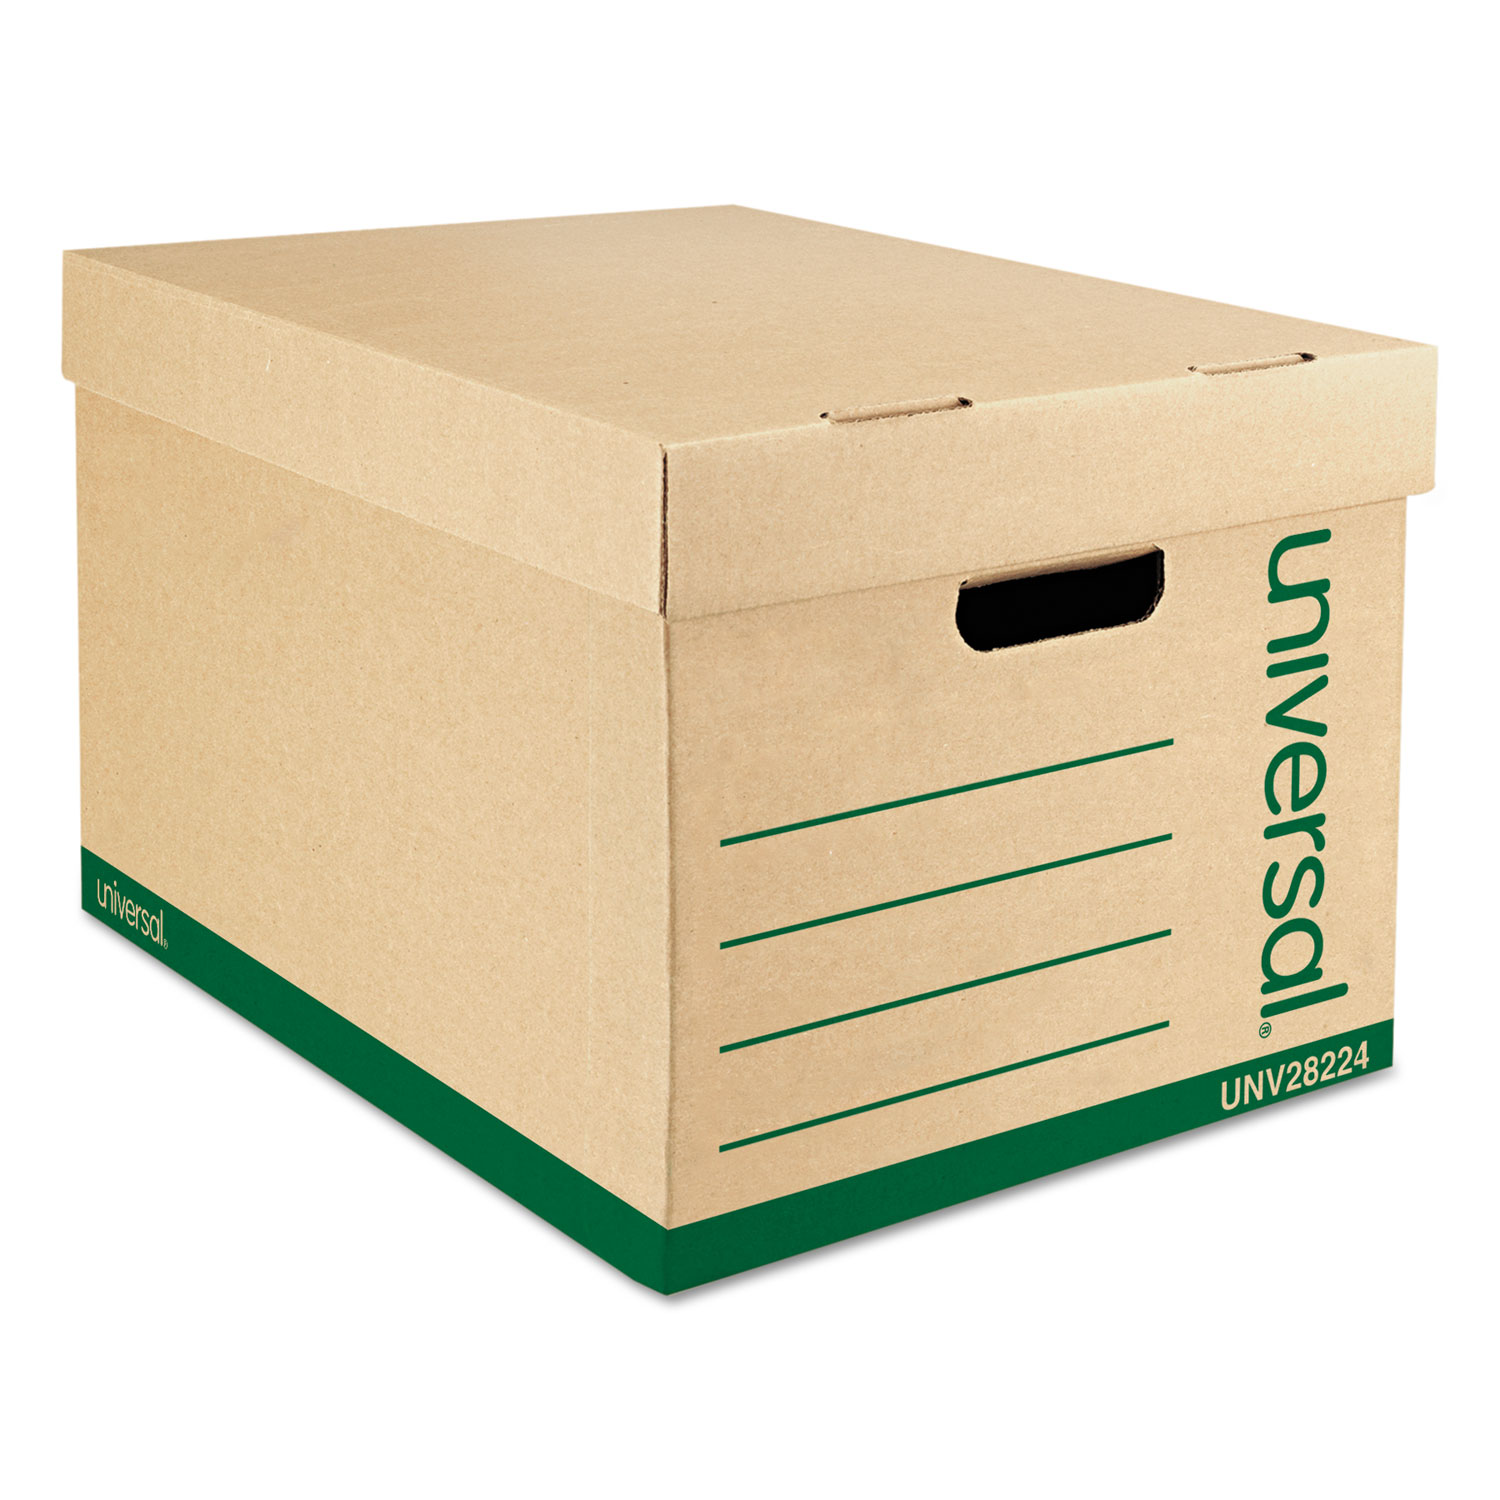  Universal 2822401 Recycled Heavy-Duty Record Storage Box, Letter/Legal Files, Kraft/Green, 12/Carton (UNV28224) 